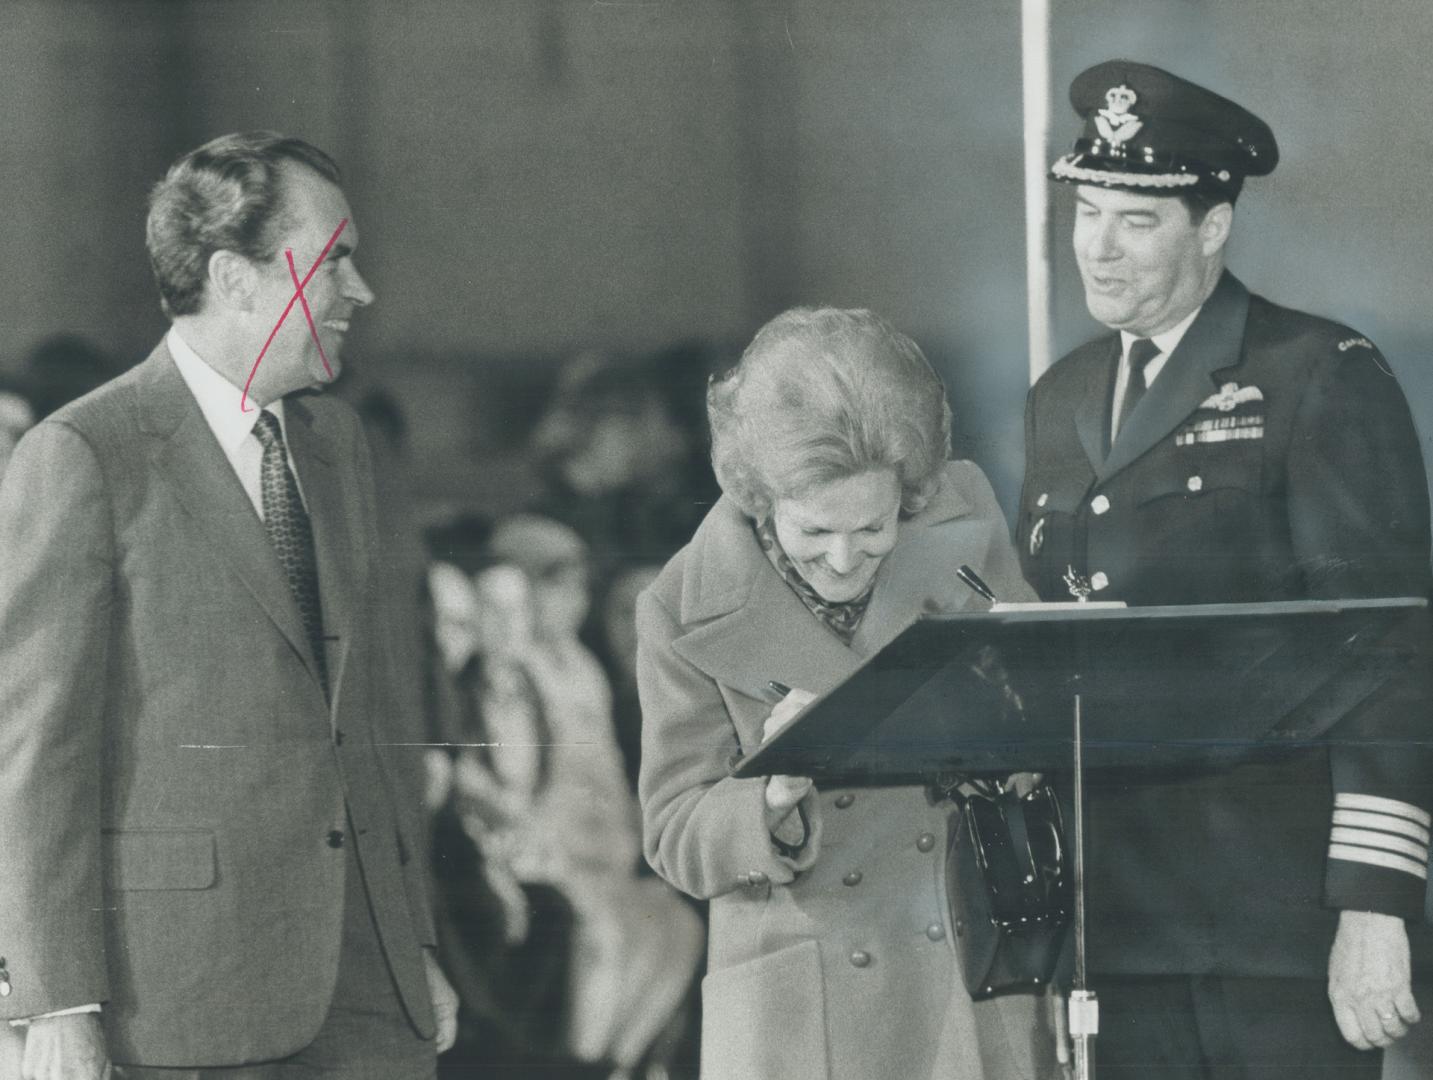 Patricia Nixon, wife of the U.S. president, signs the visitors' book on her arrival at Uplands Airbase, Ottawa, with Col. Ken Wark, base commander, at(...)